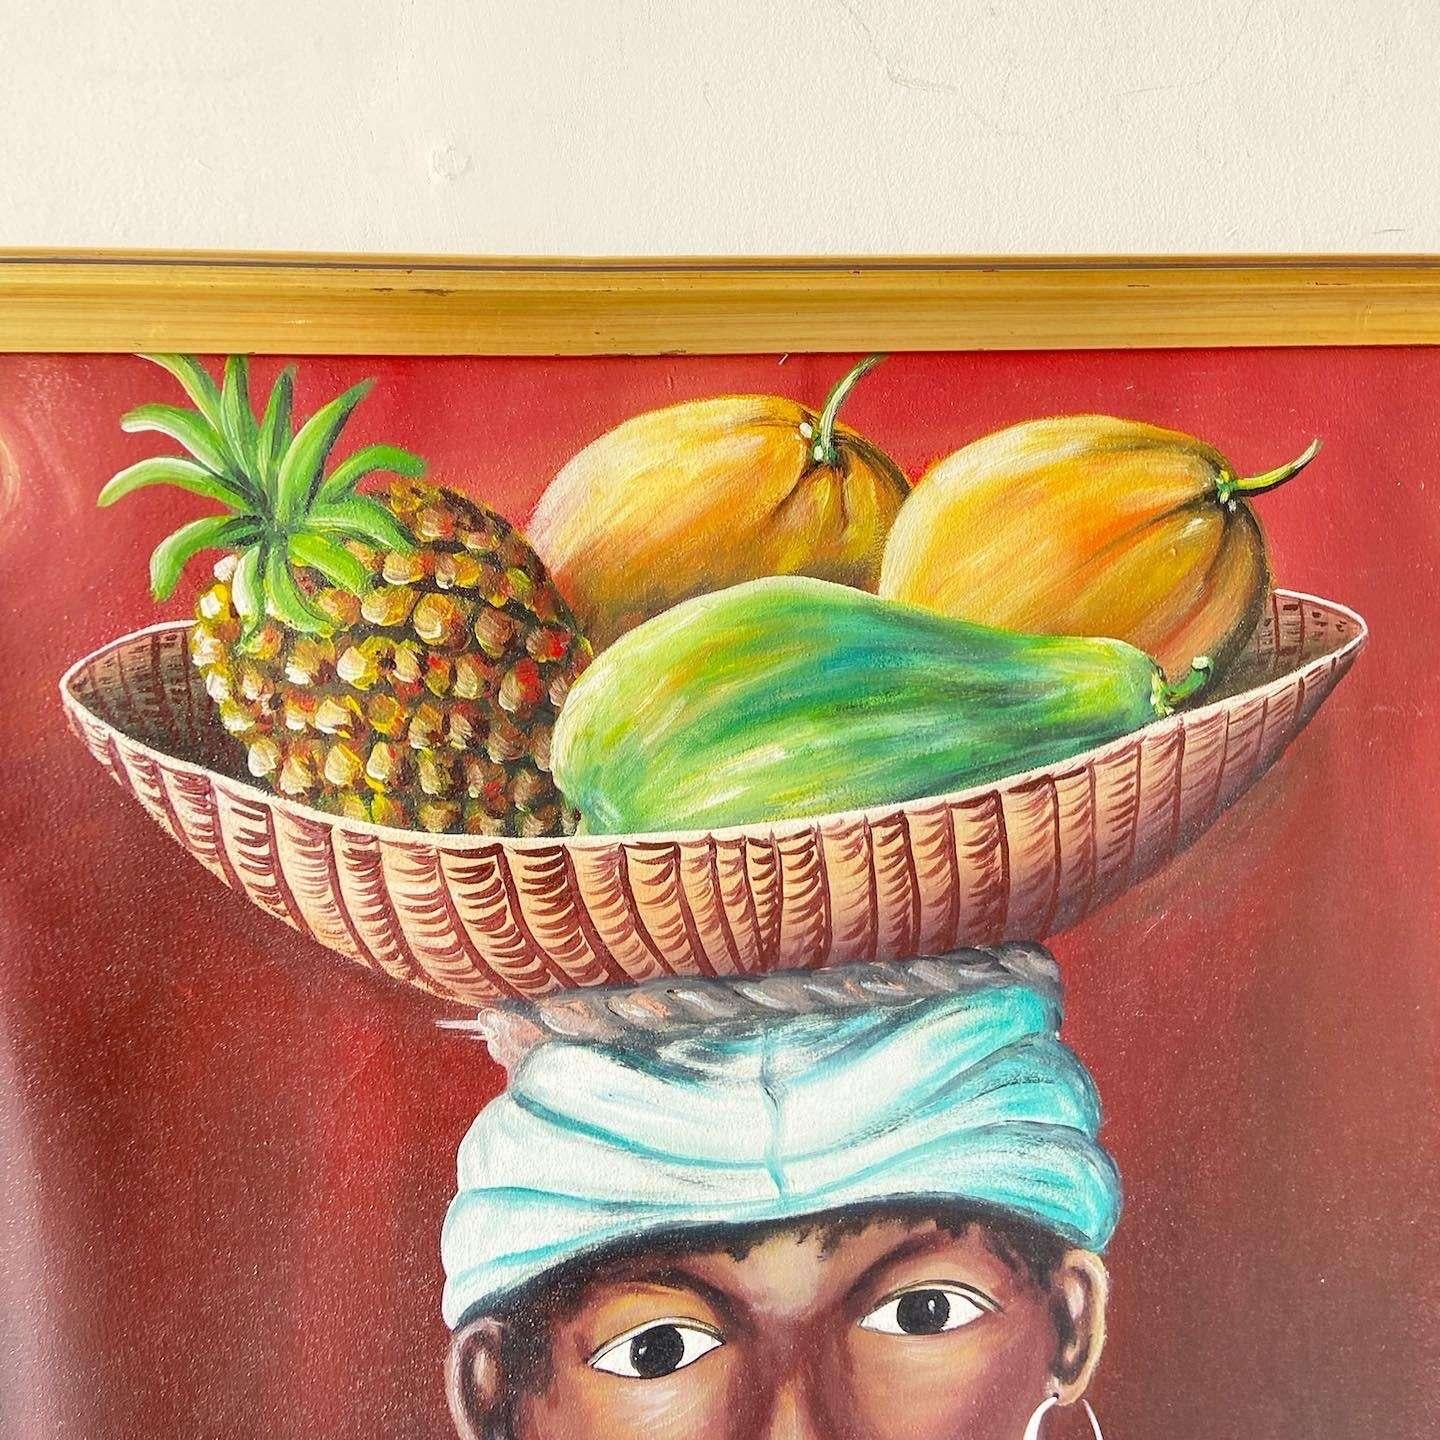 Original Framed Oil Painting of Caribbean Woman With Fruit Bowl by Scroggin For Sale 1